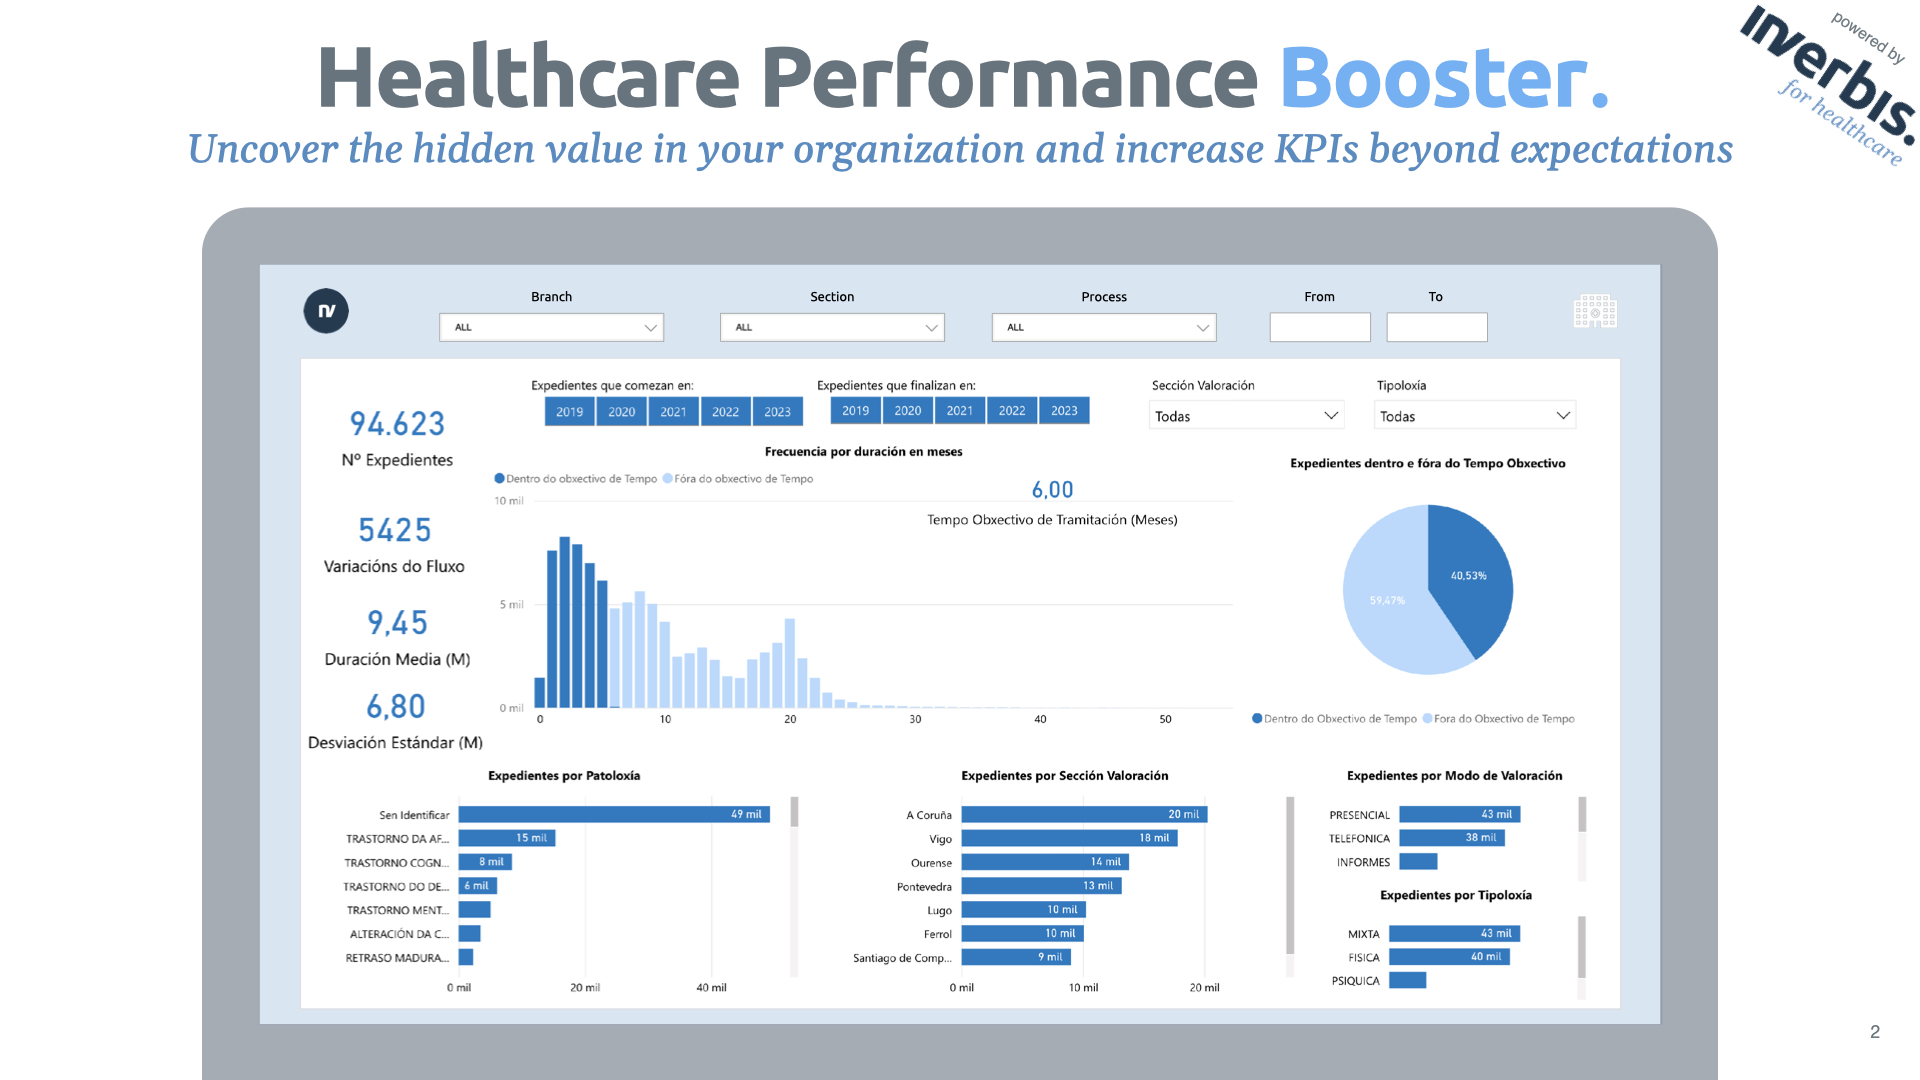 Performance Booster for Healthcare by Inverbis